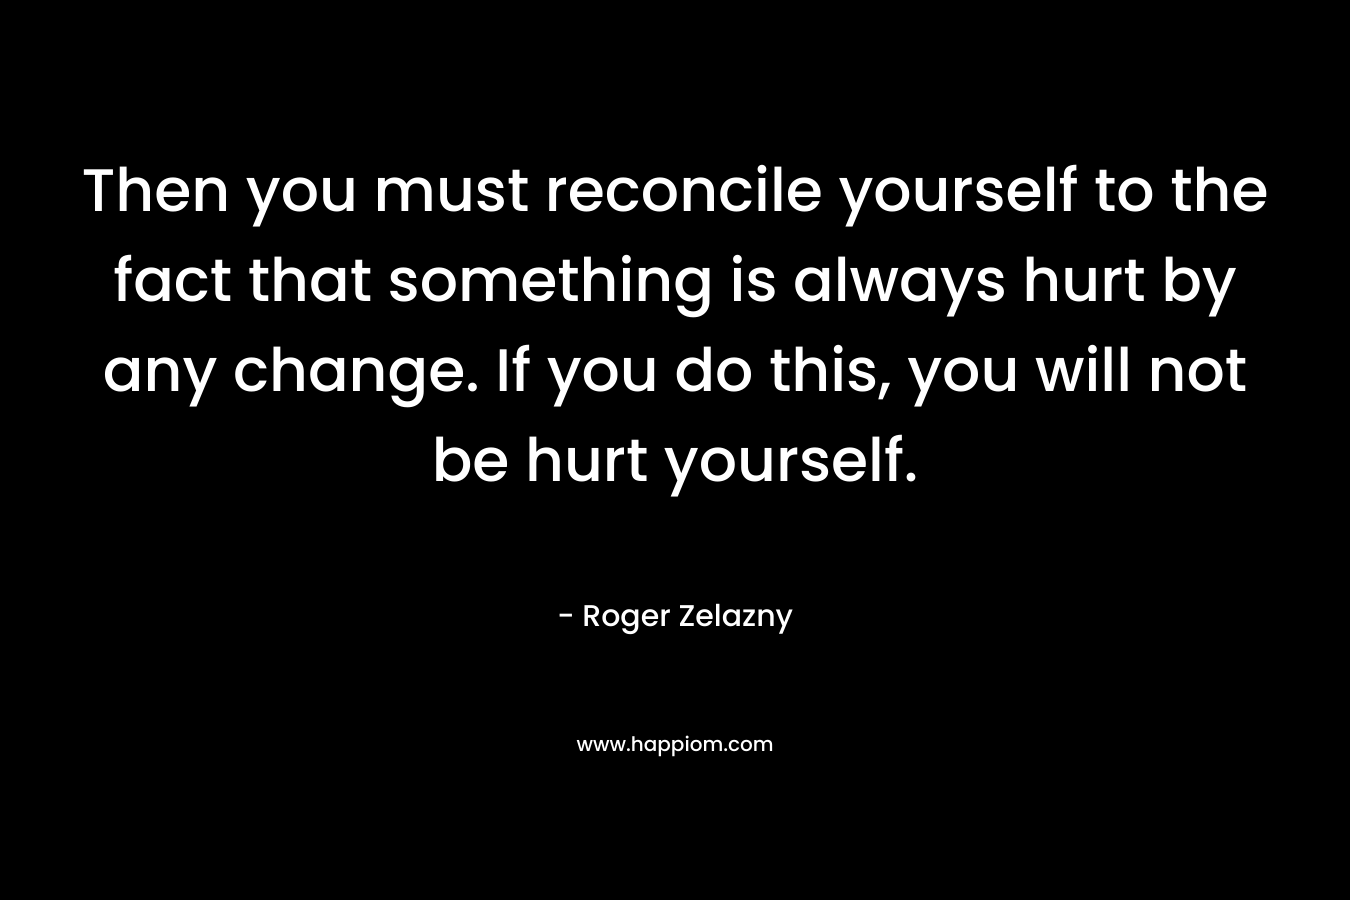 Then you must reconcile yourself to the fact that something is always hurt by any change. If you do this, you will not be hurt yourself. – Roger Zelazny